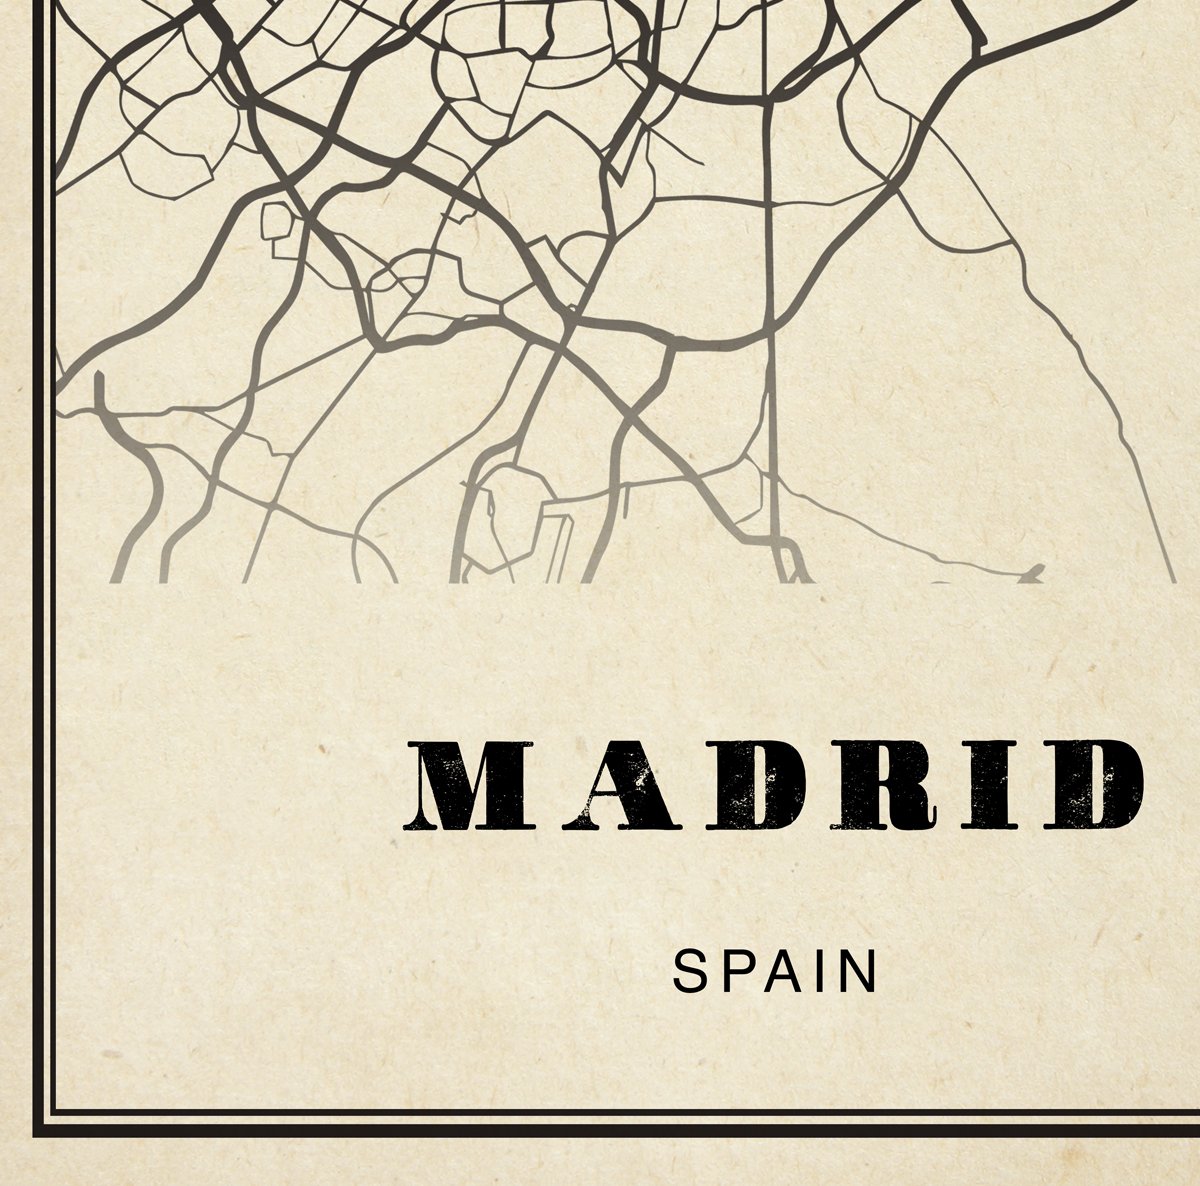 Madrid City Map Sepia Poster